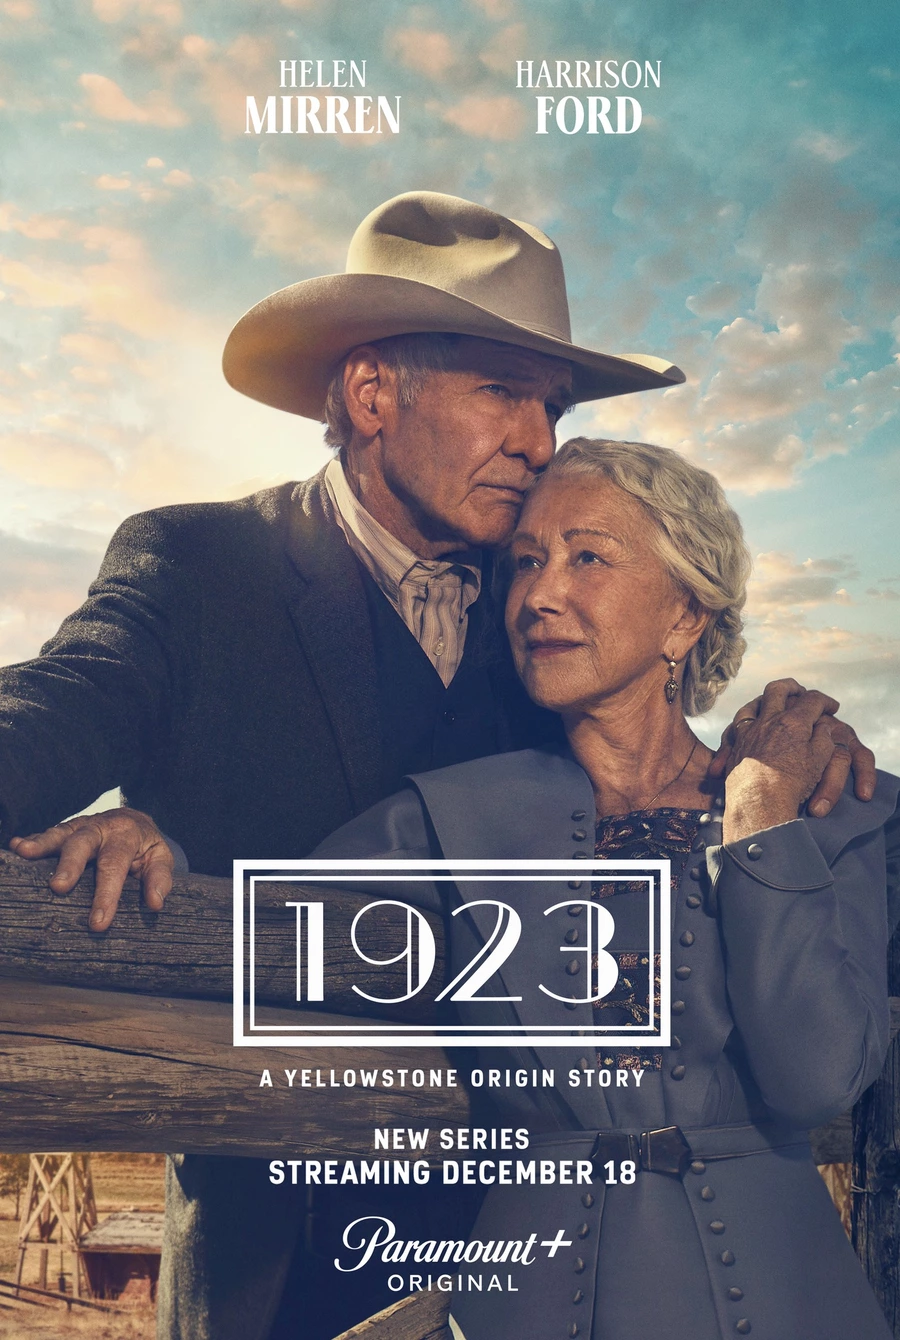 5576 harrison ford and helen mirren on the poster for the series 1923 which will premiere on dece